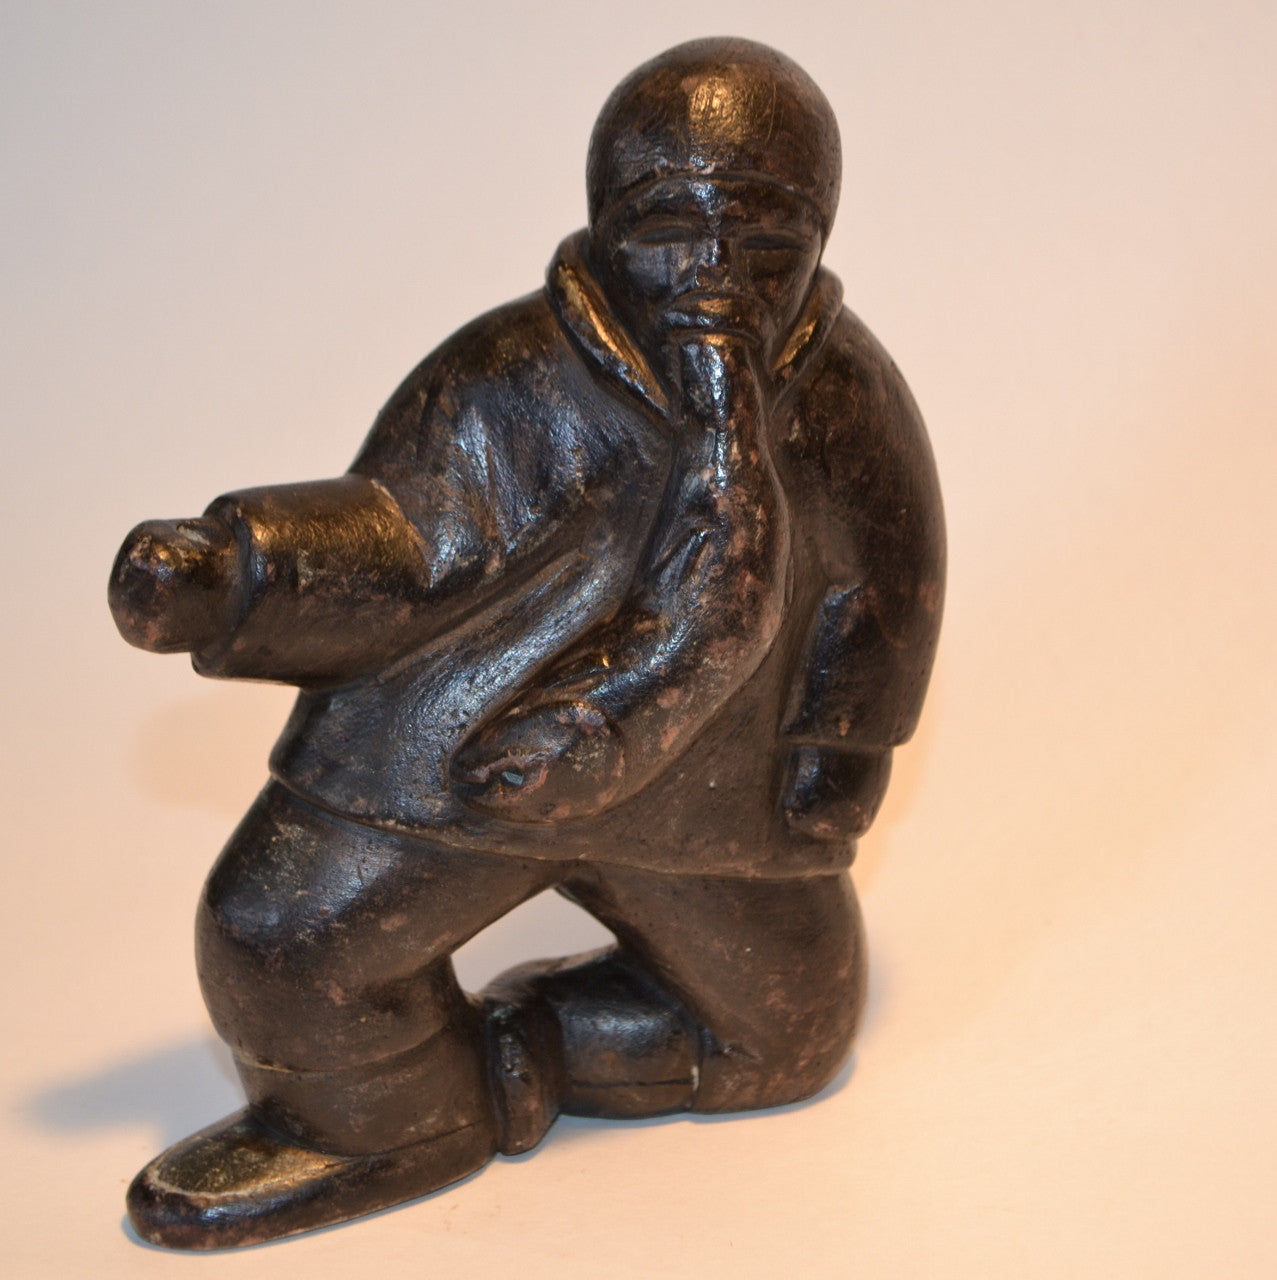 Inuit carving fisherman with fish in mouth